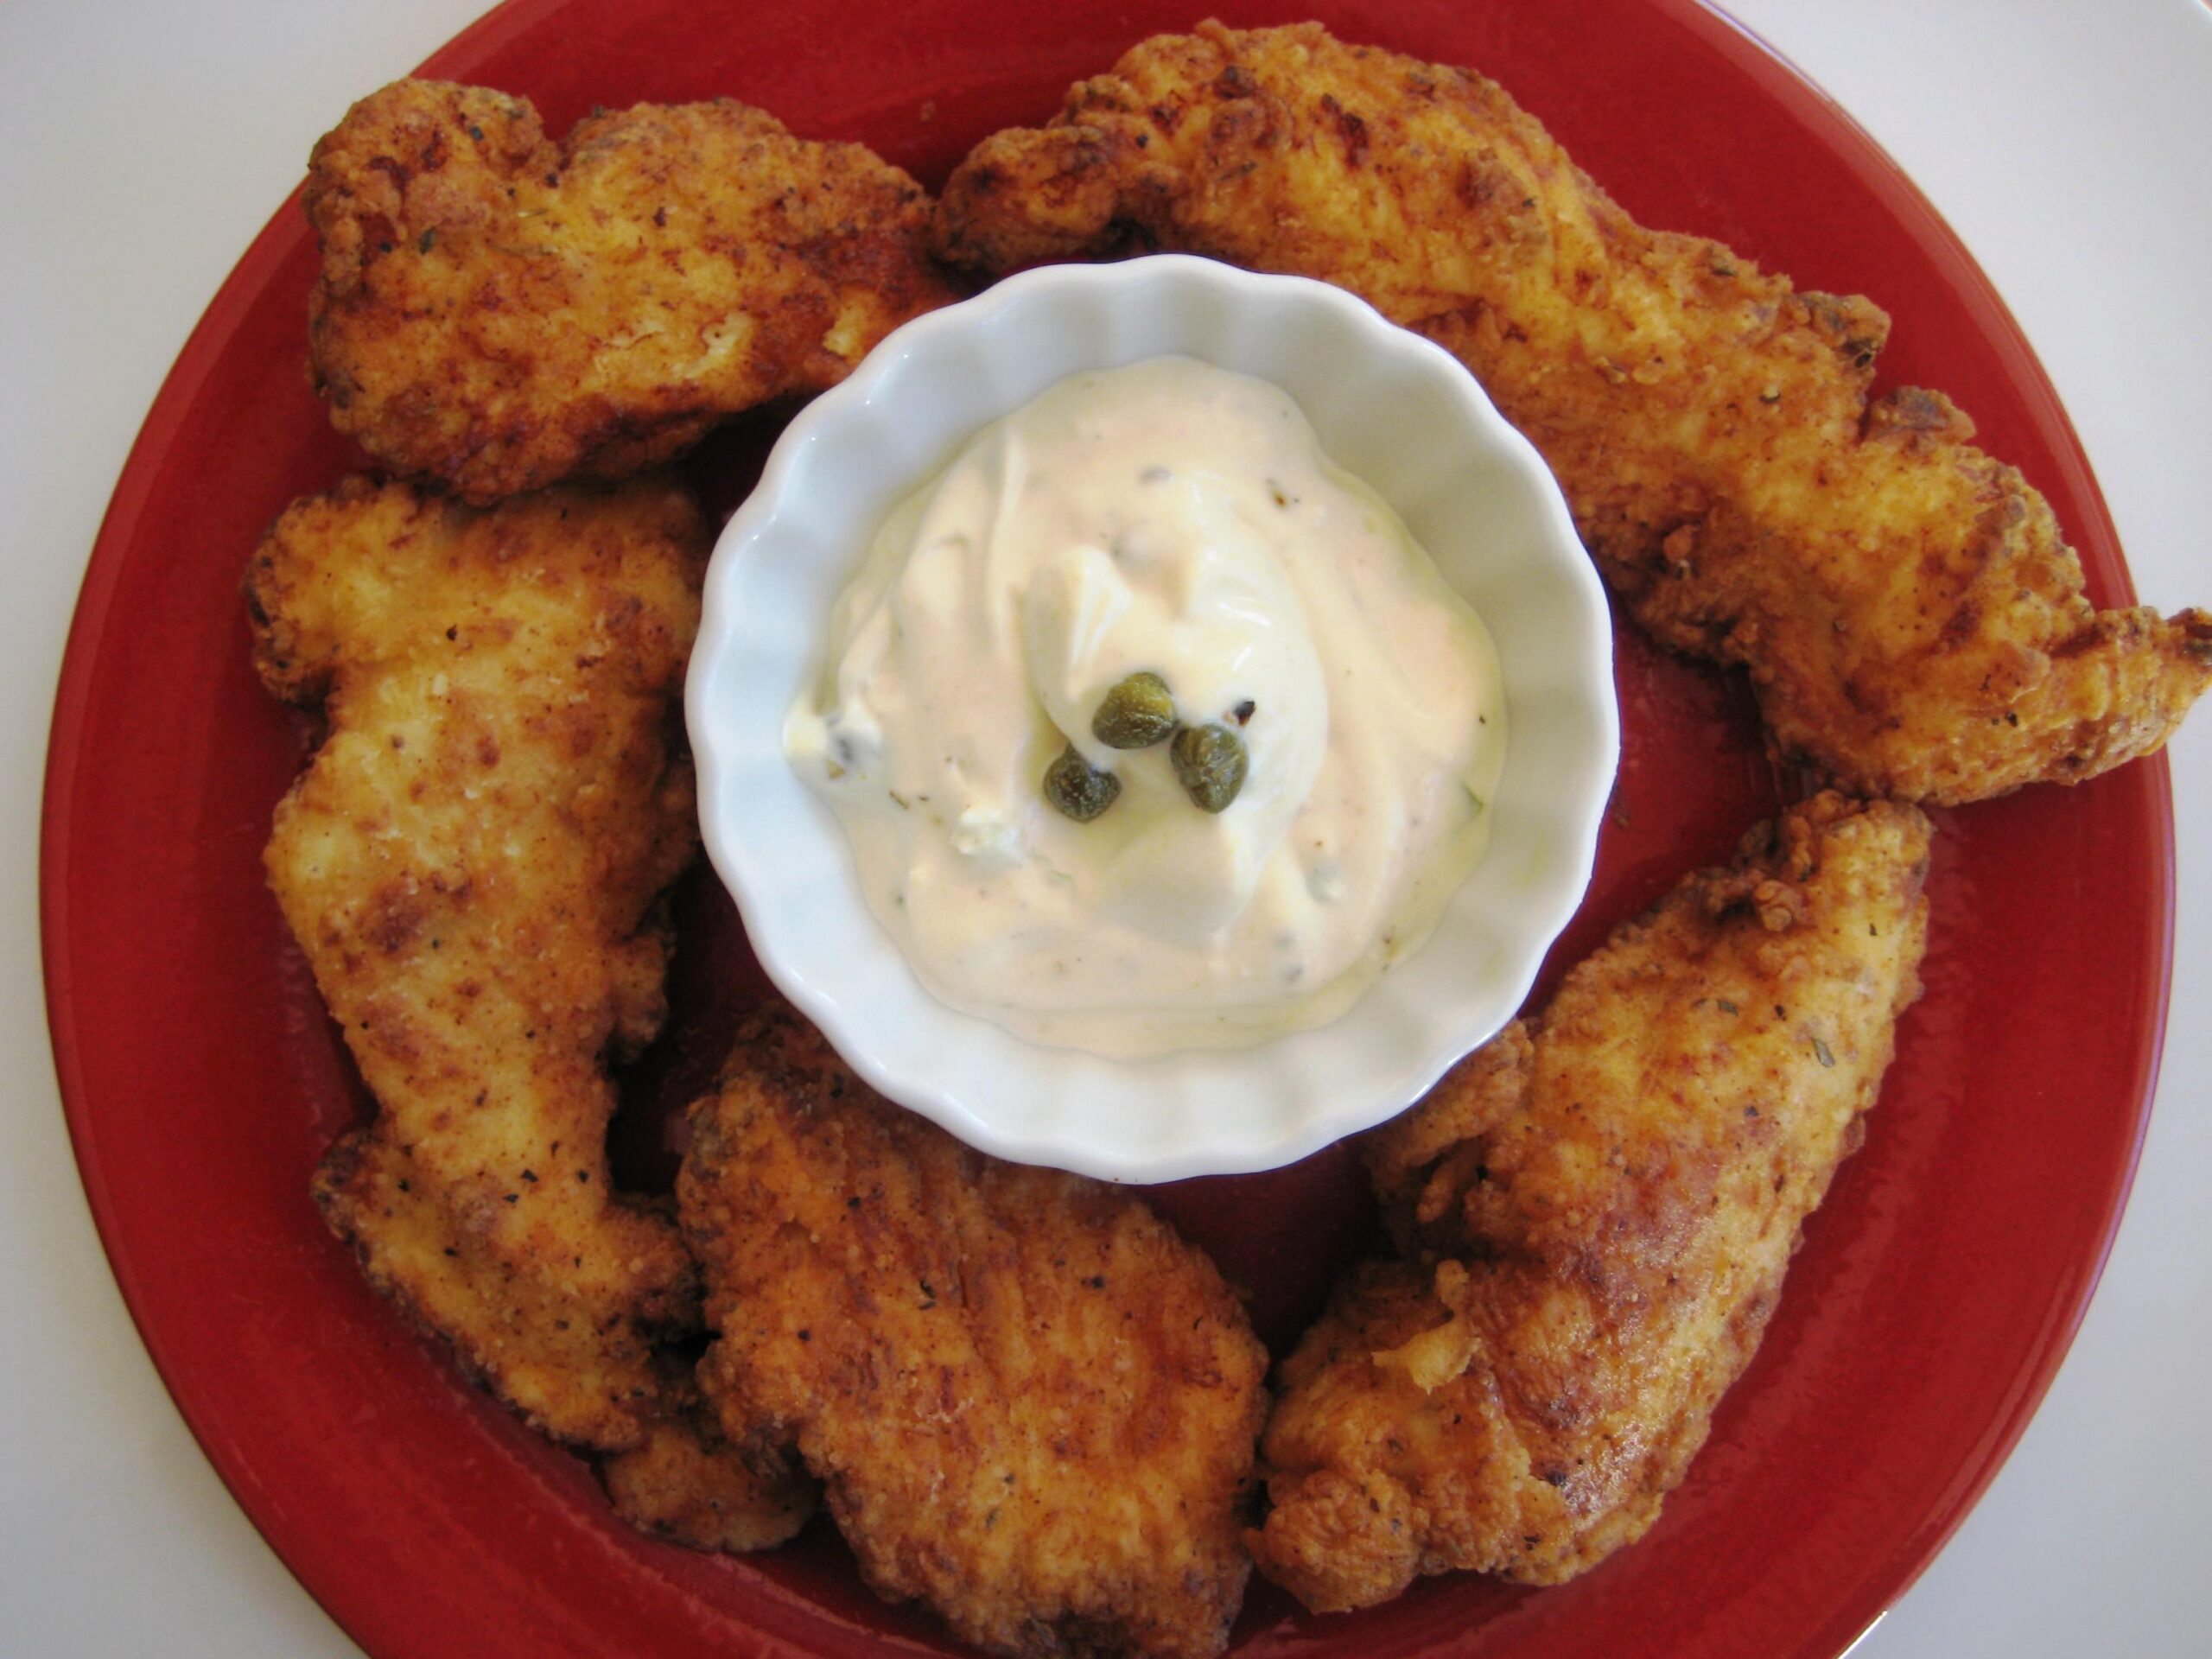  The green peppercorn mayo brings a tangy and savory flavor to the dish.